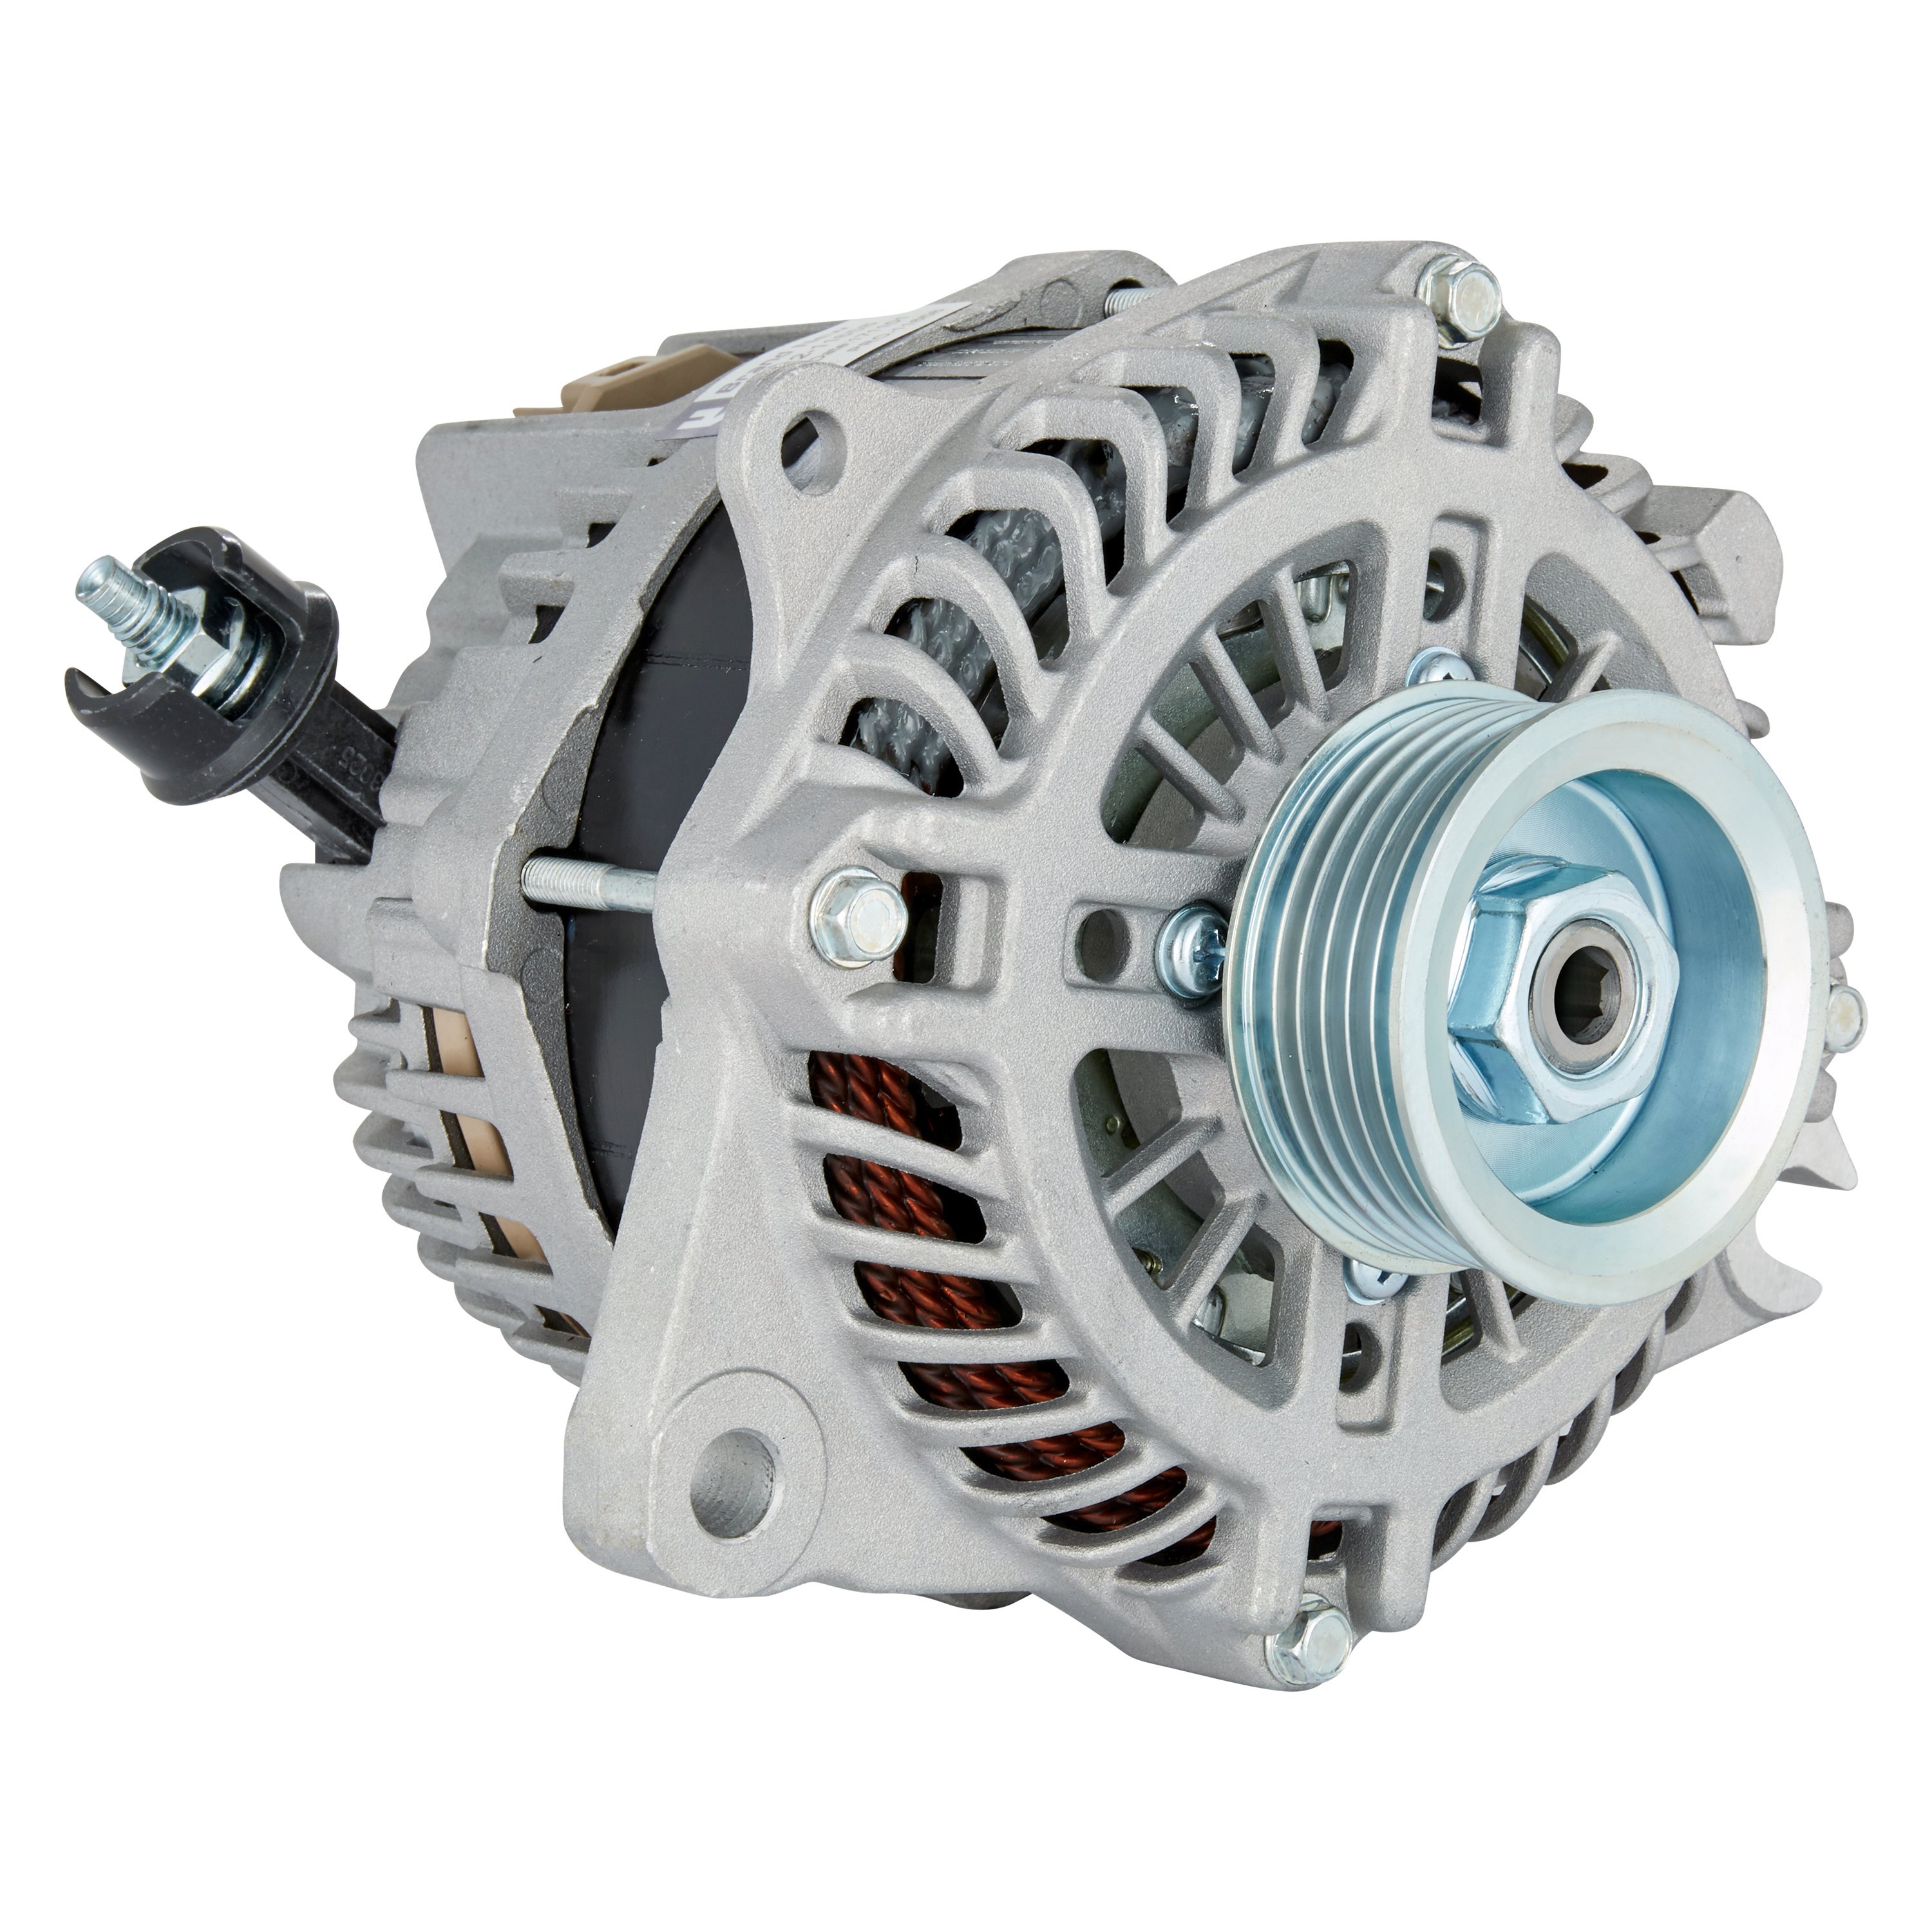 TYC Note: Regulator Position: Internal, Fan Position: Internal, Power Generation: 175A - Premium Quanlity With One Year Warranty Alternator For 2014 Ford Explorer